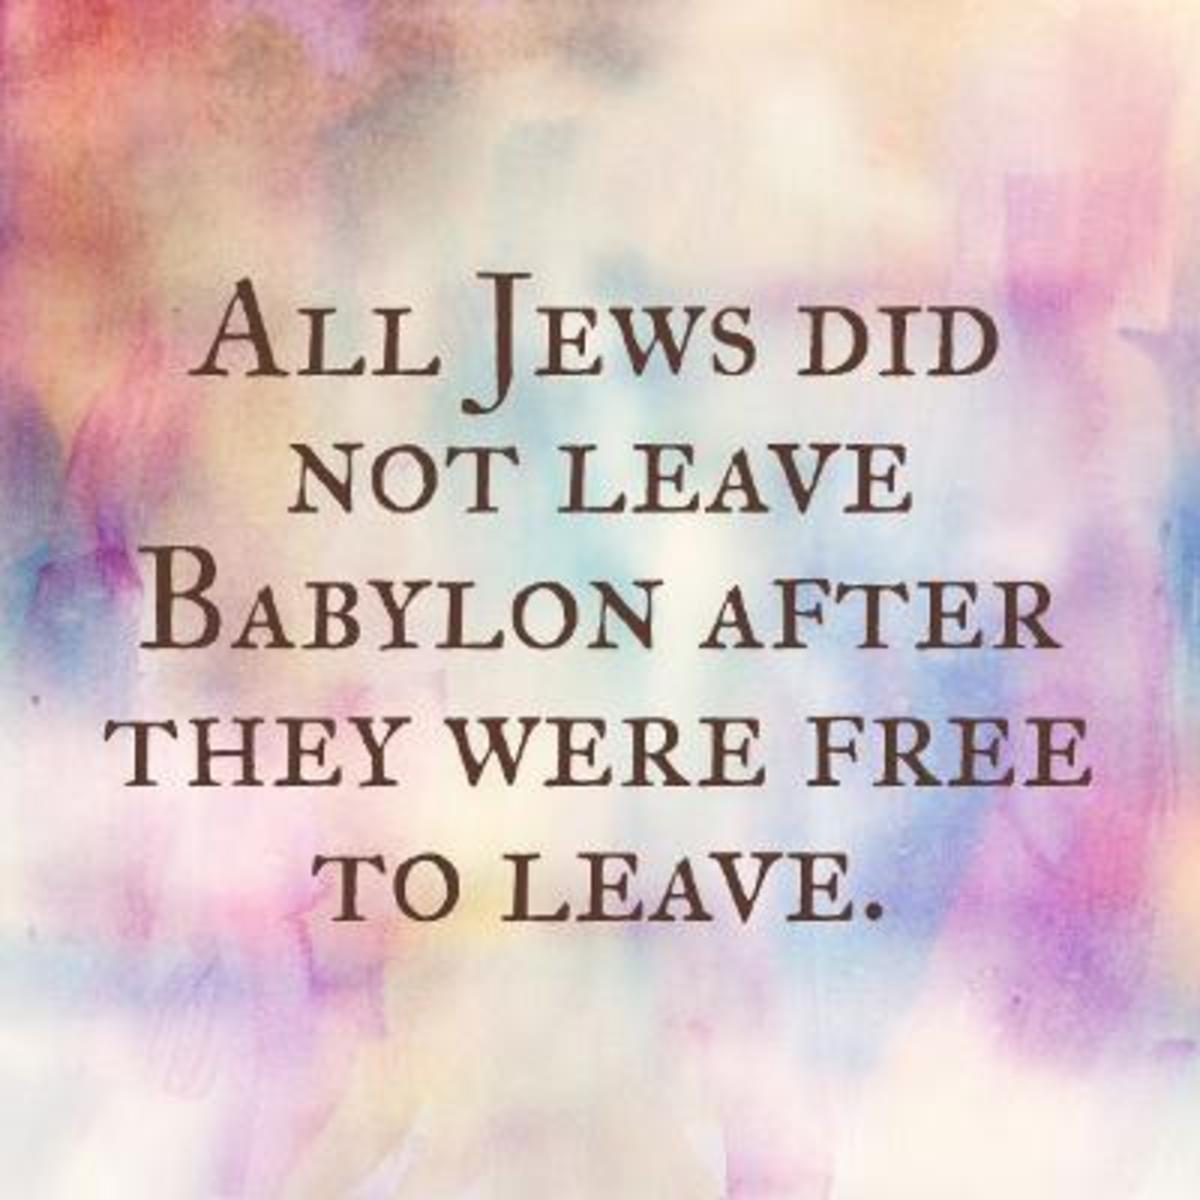 Reasons Many Israelites Refused to Return Home After They Were Freed from Babylon